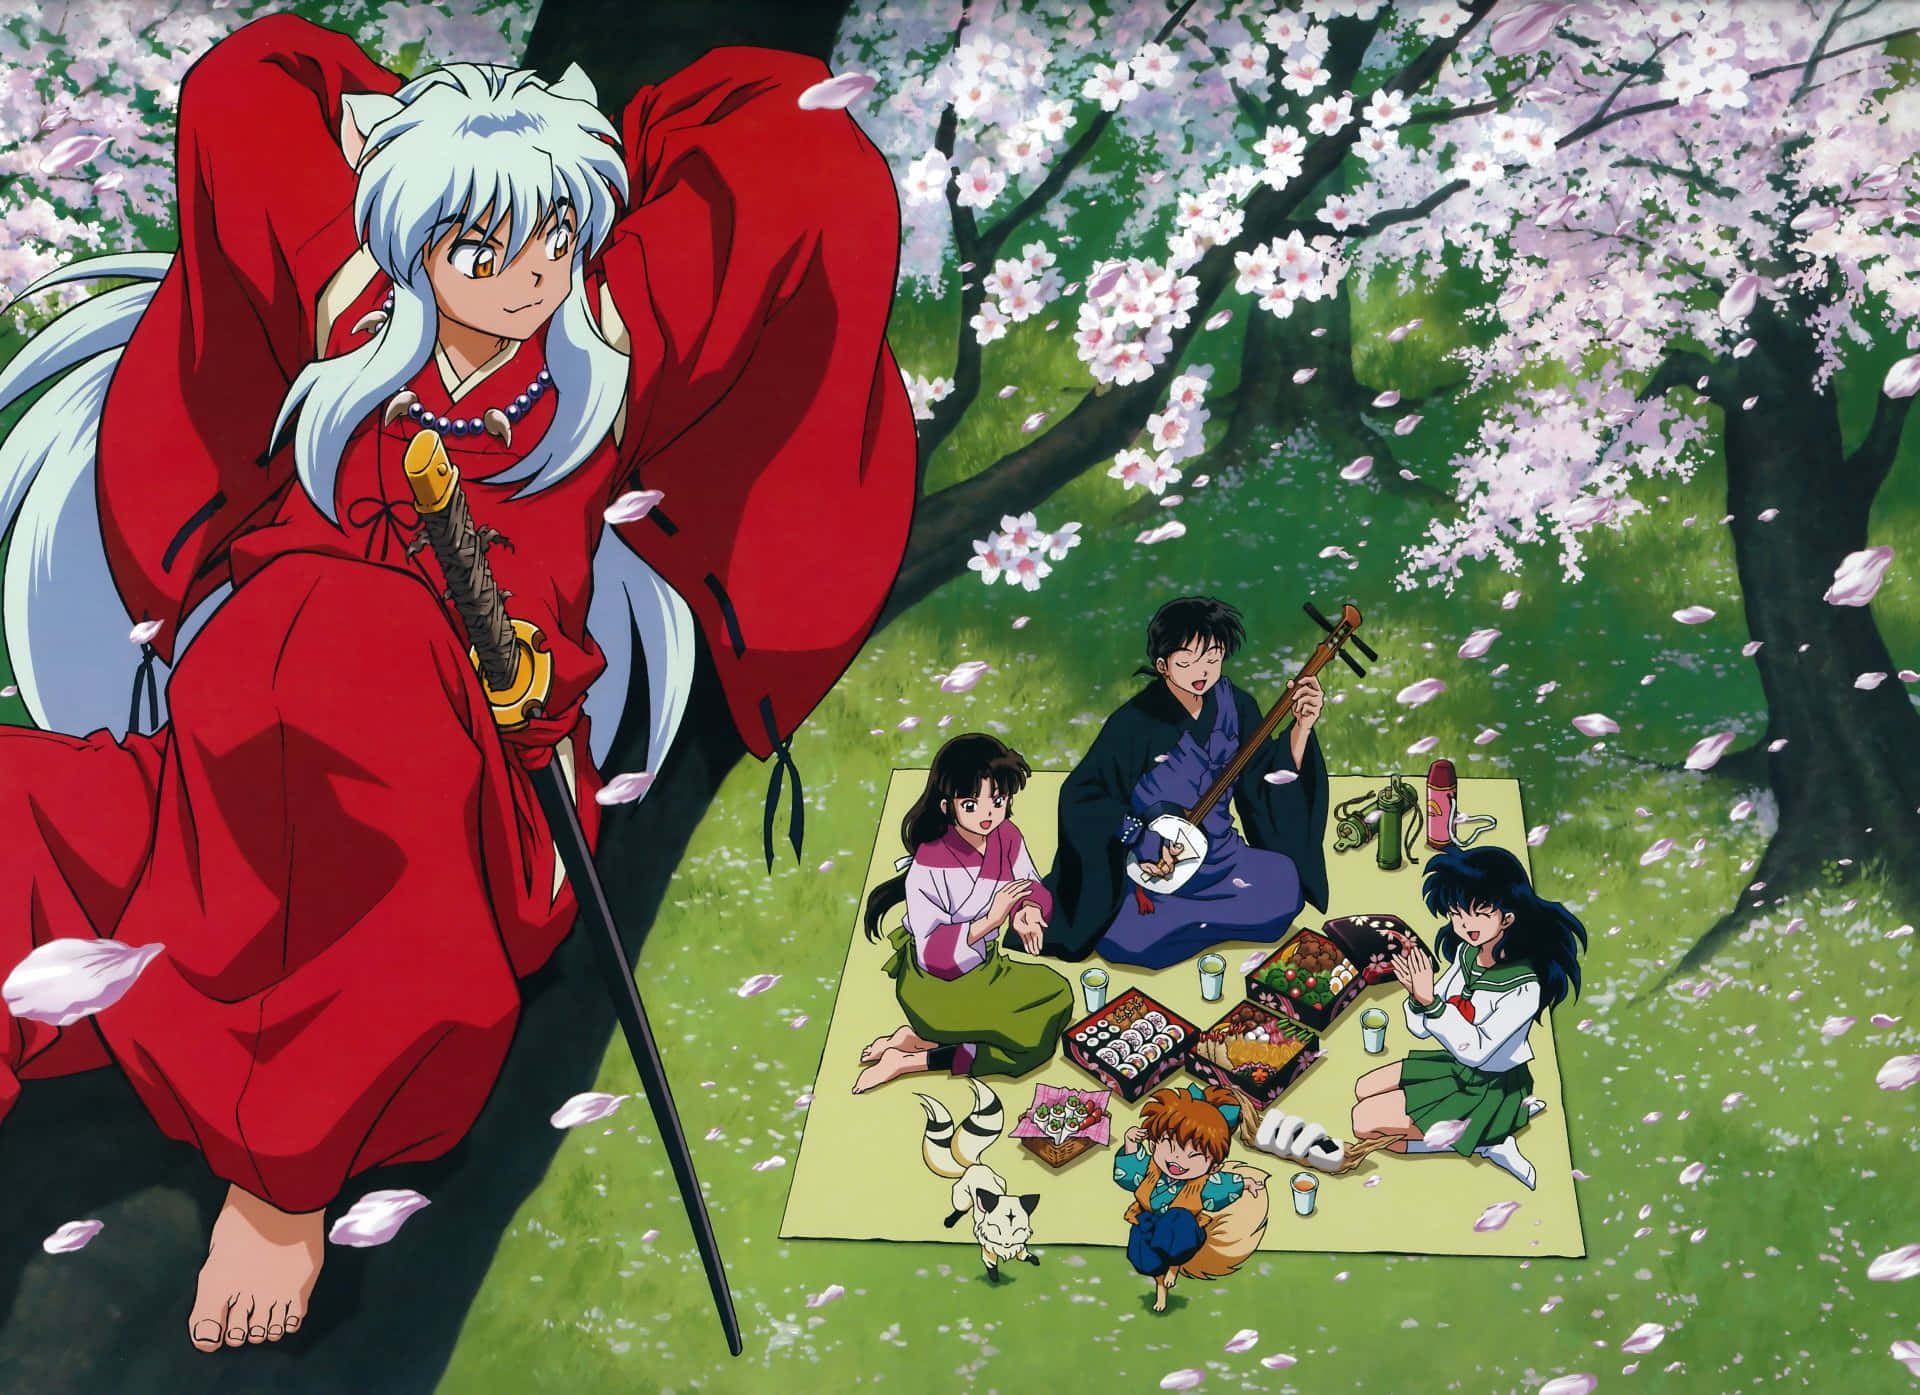 Inuyasha Vowing to Protect Kagome